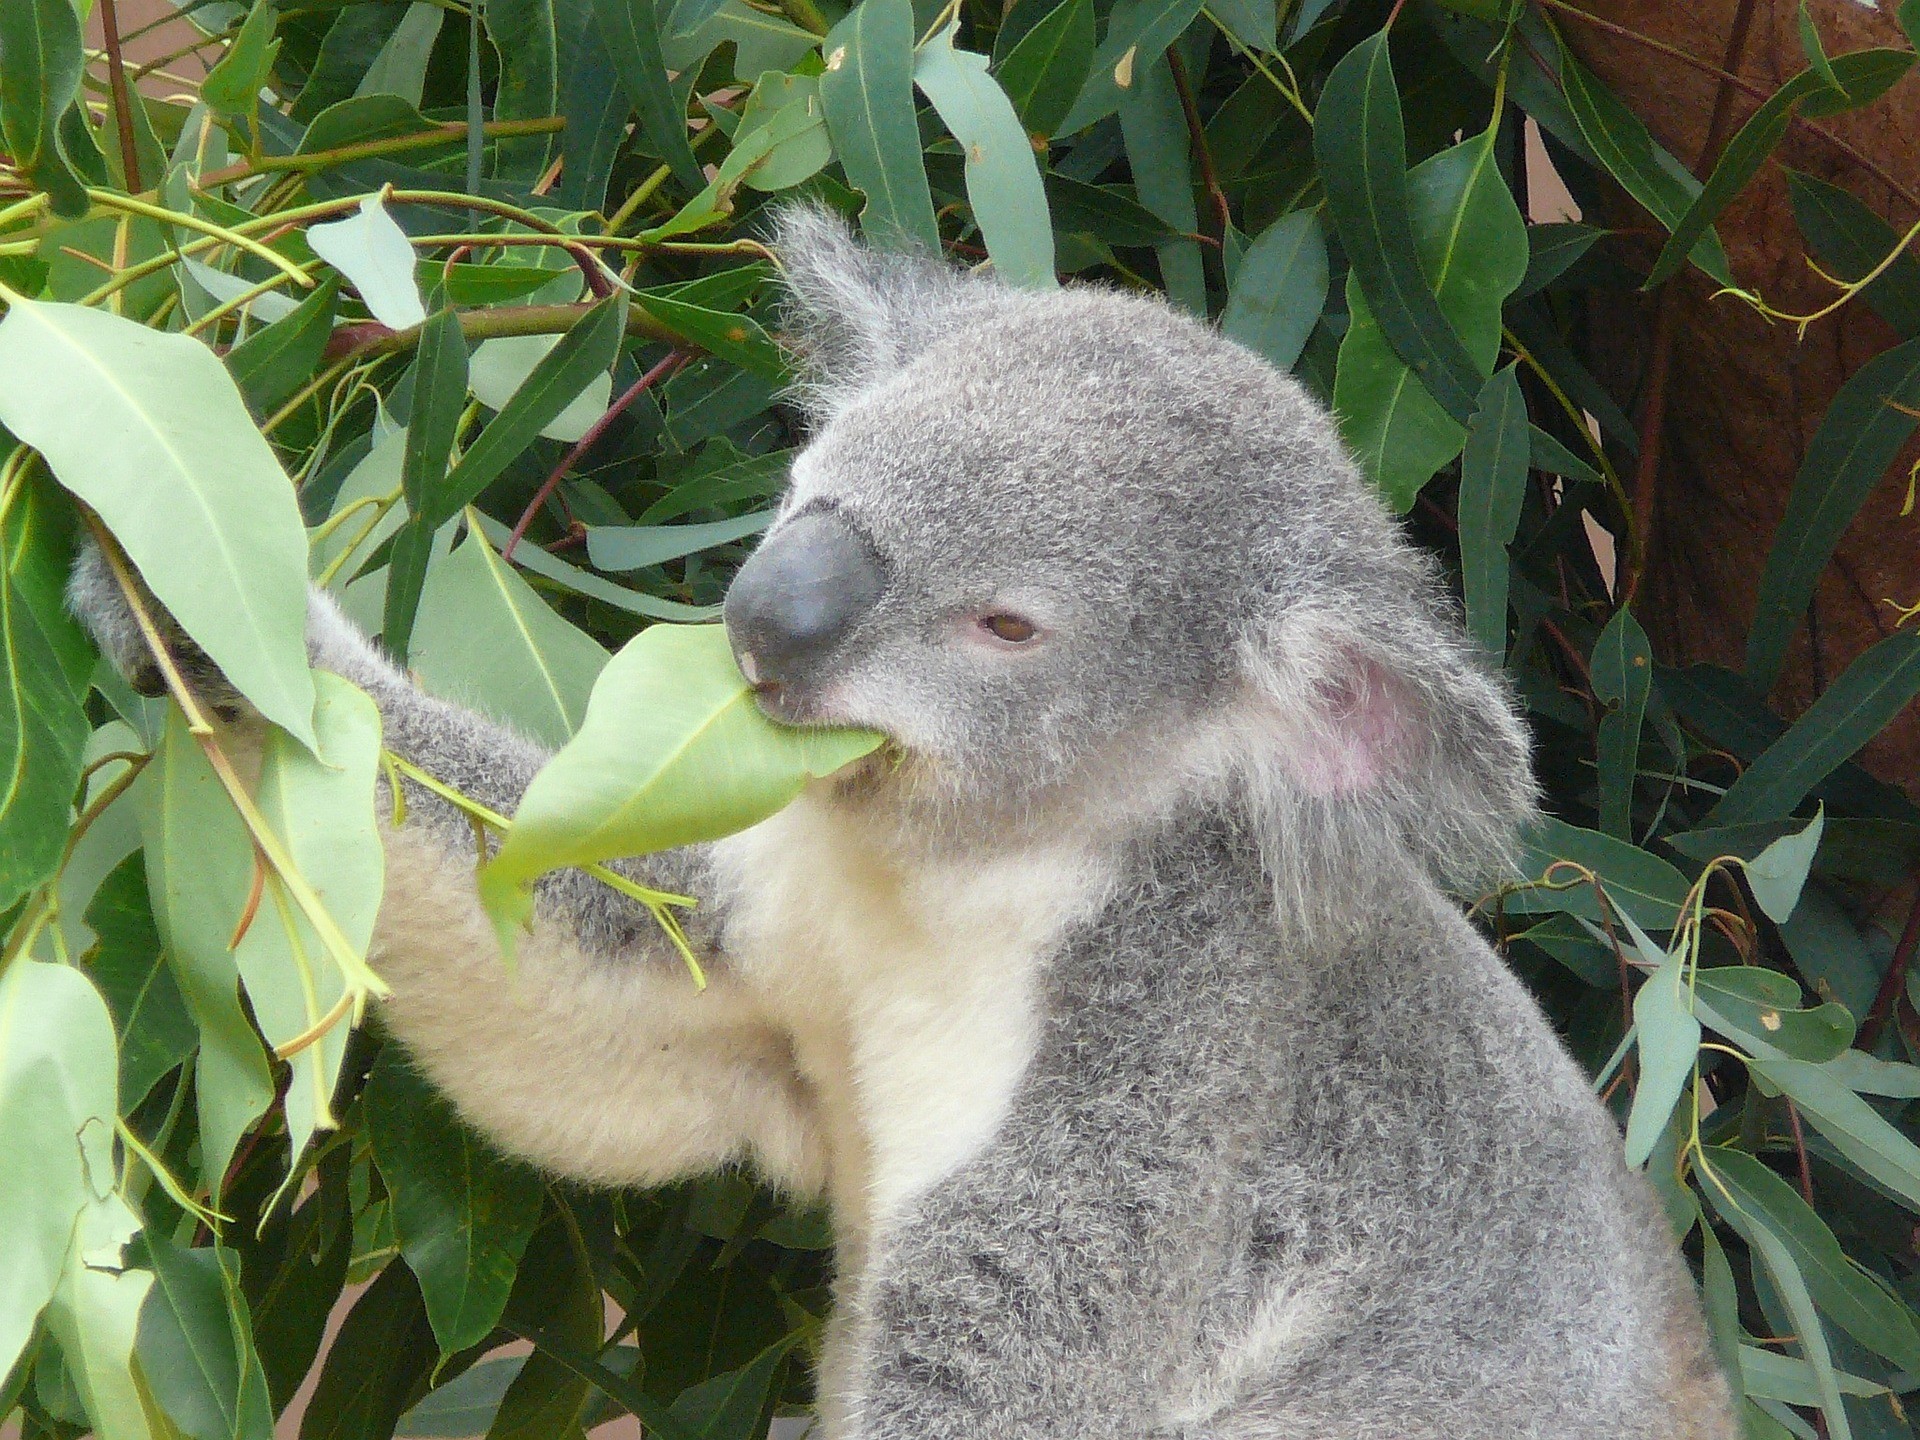 9 Places to see Koalas in the Wild - Melbourne